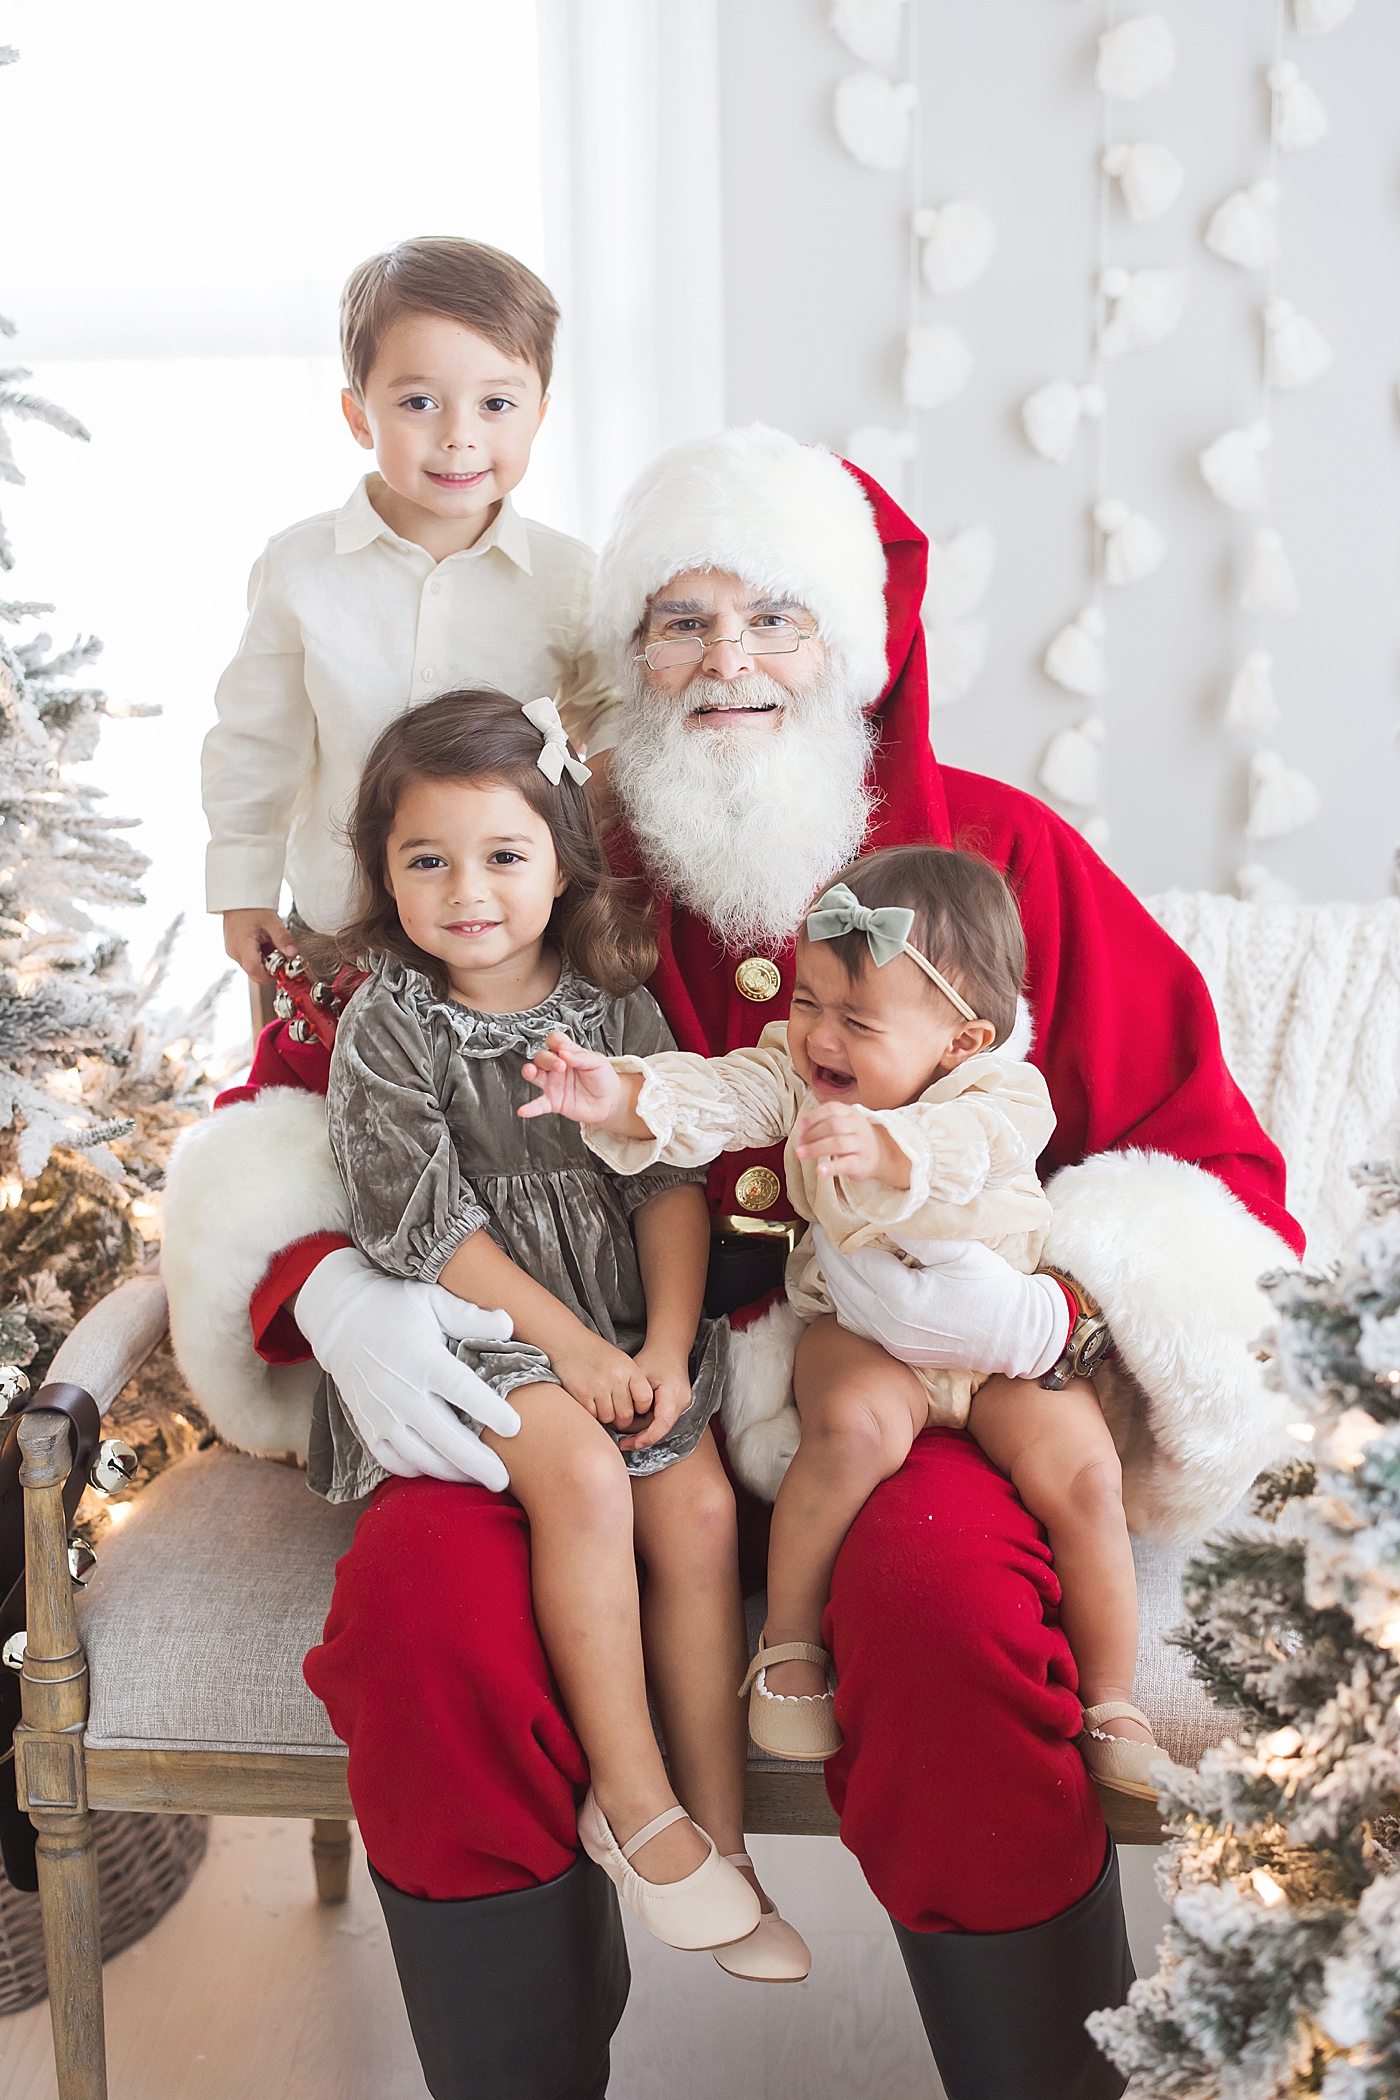 Siblings sitting on Santa's lap. Photo by Fresh Light Photography.